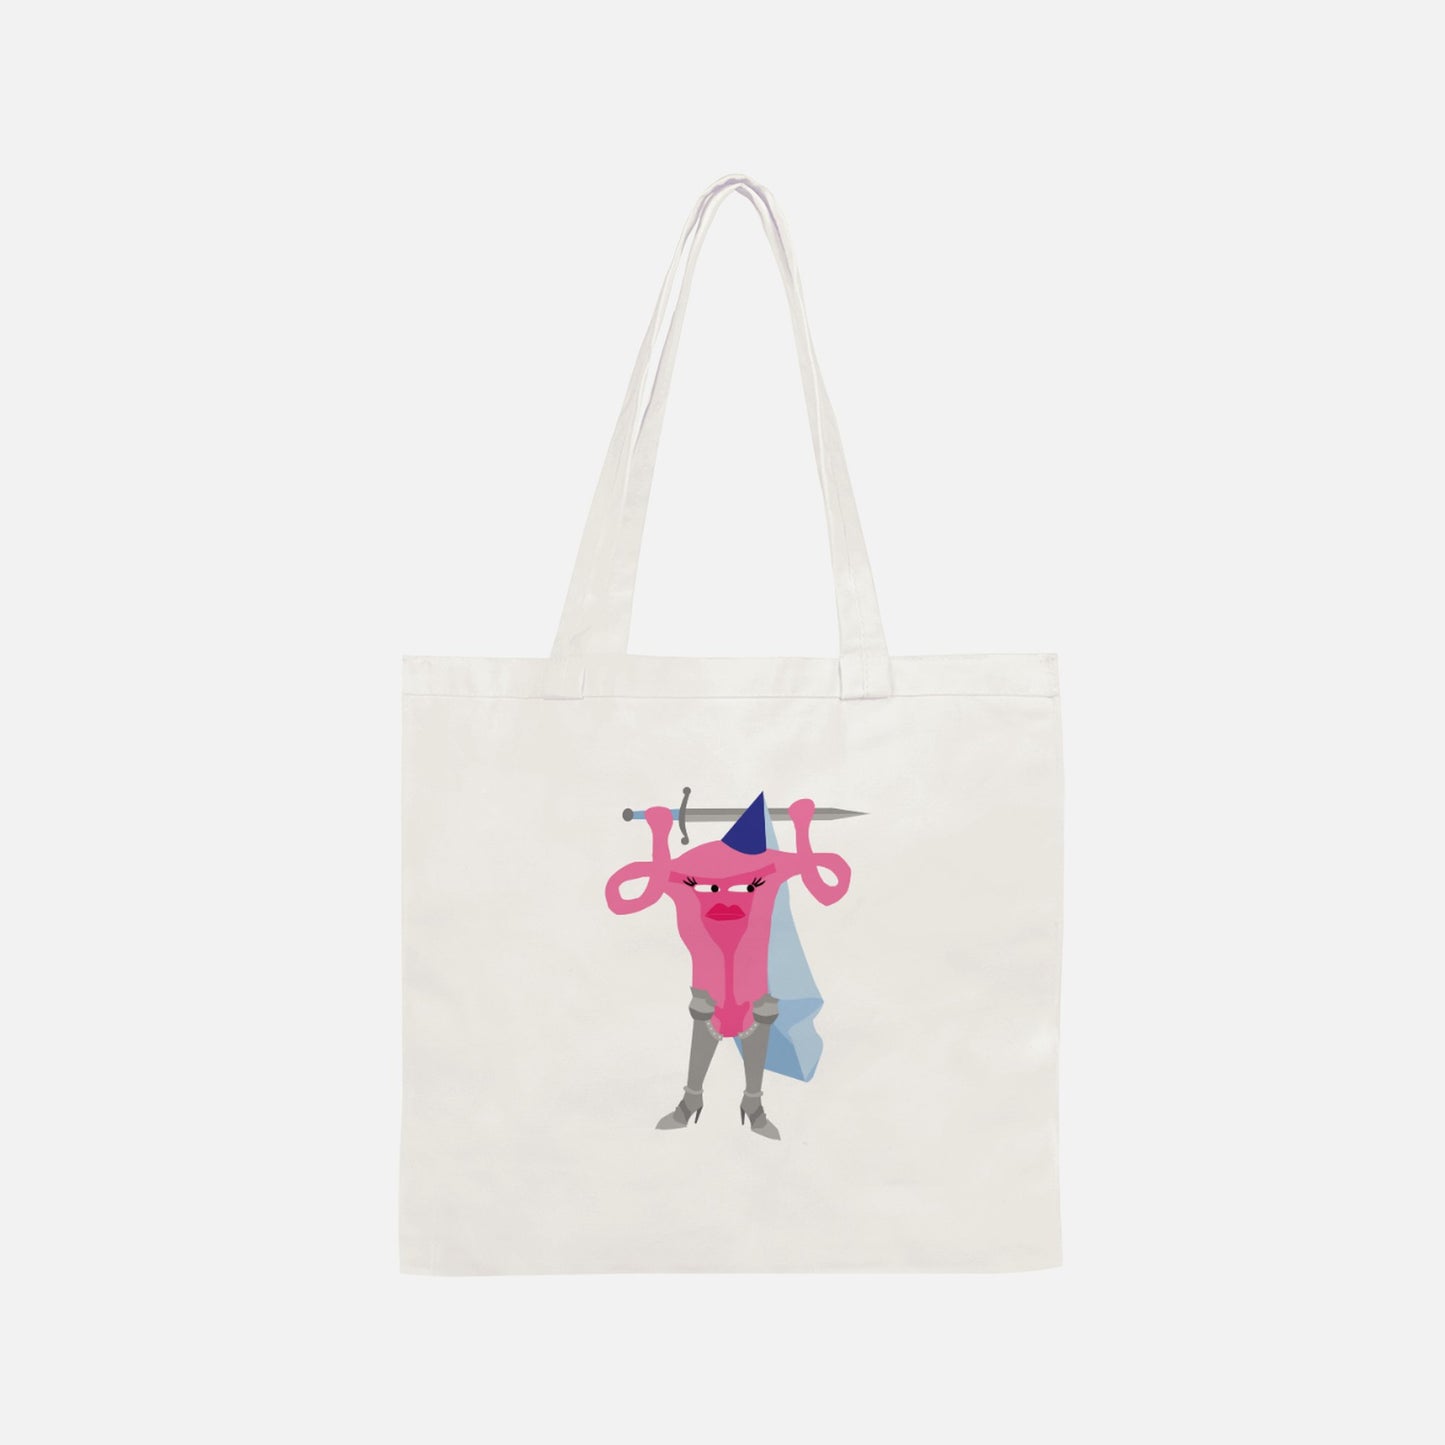 'PROTECT OUR PUSSIES' Knight Tote